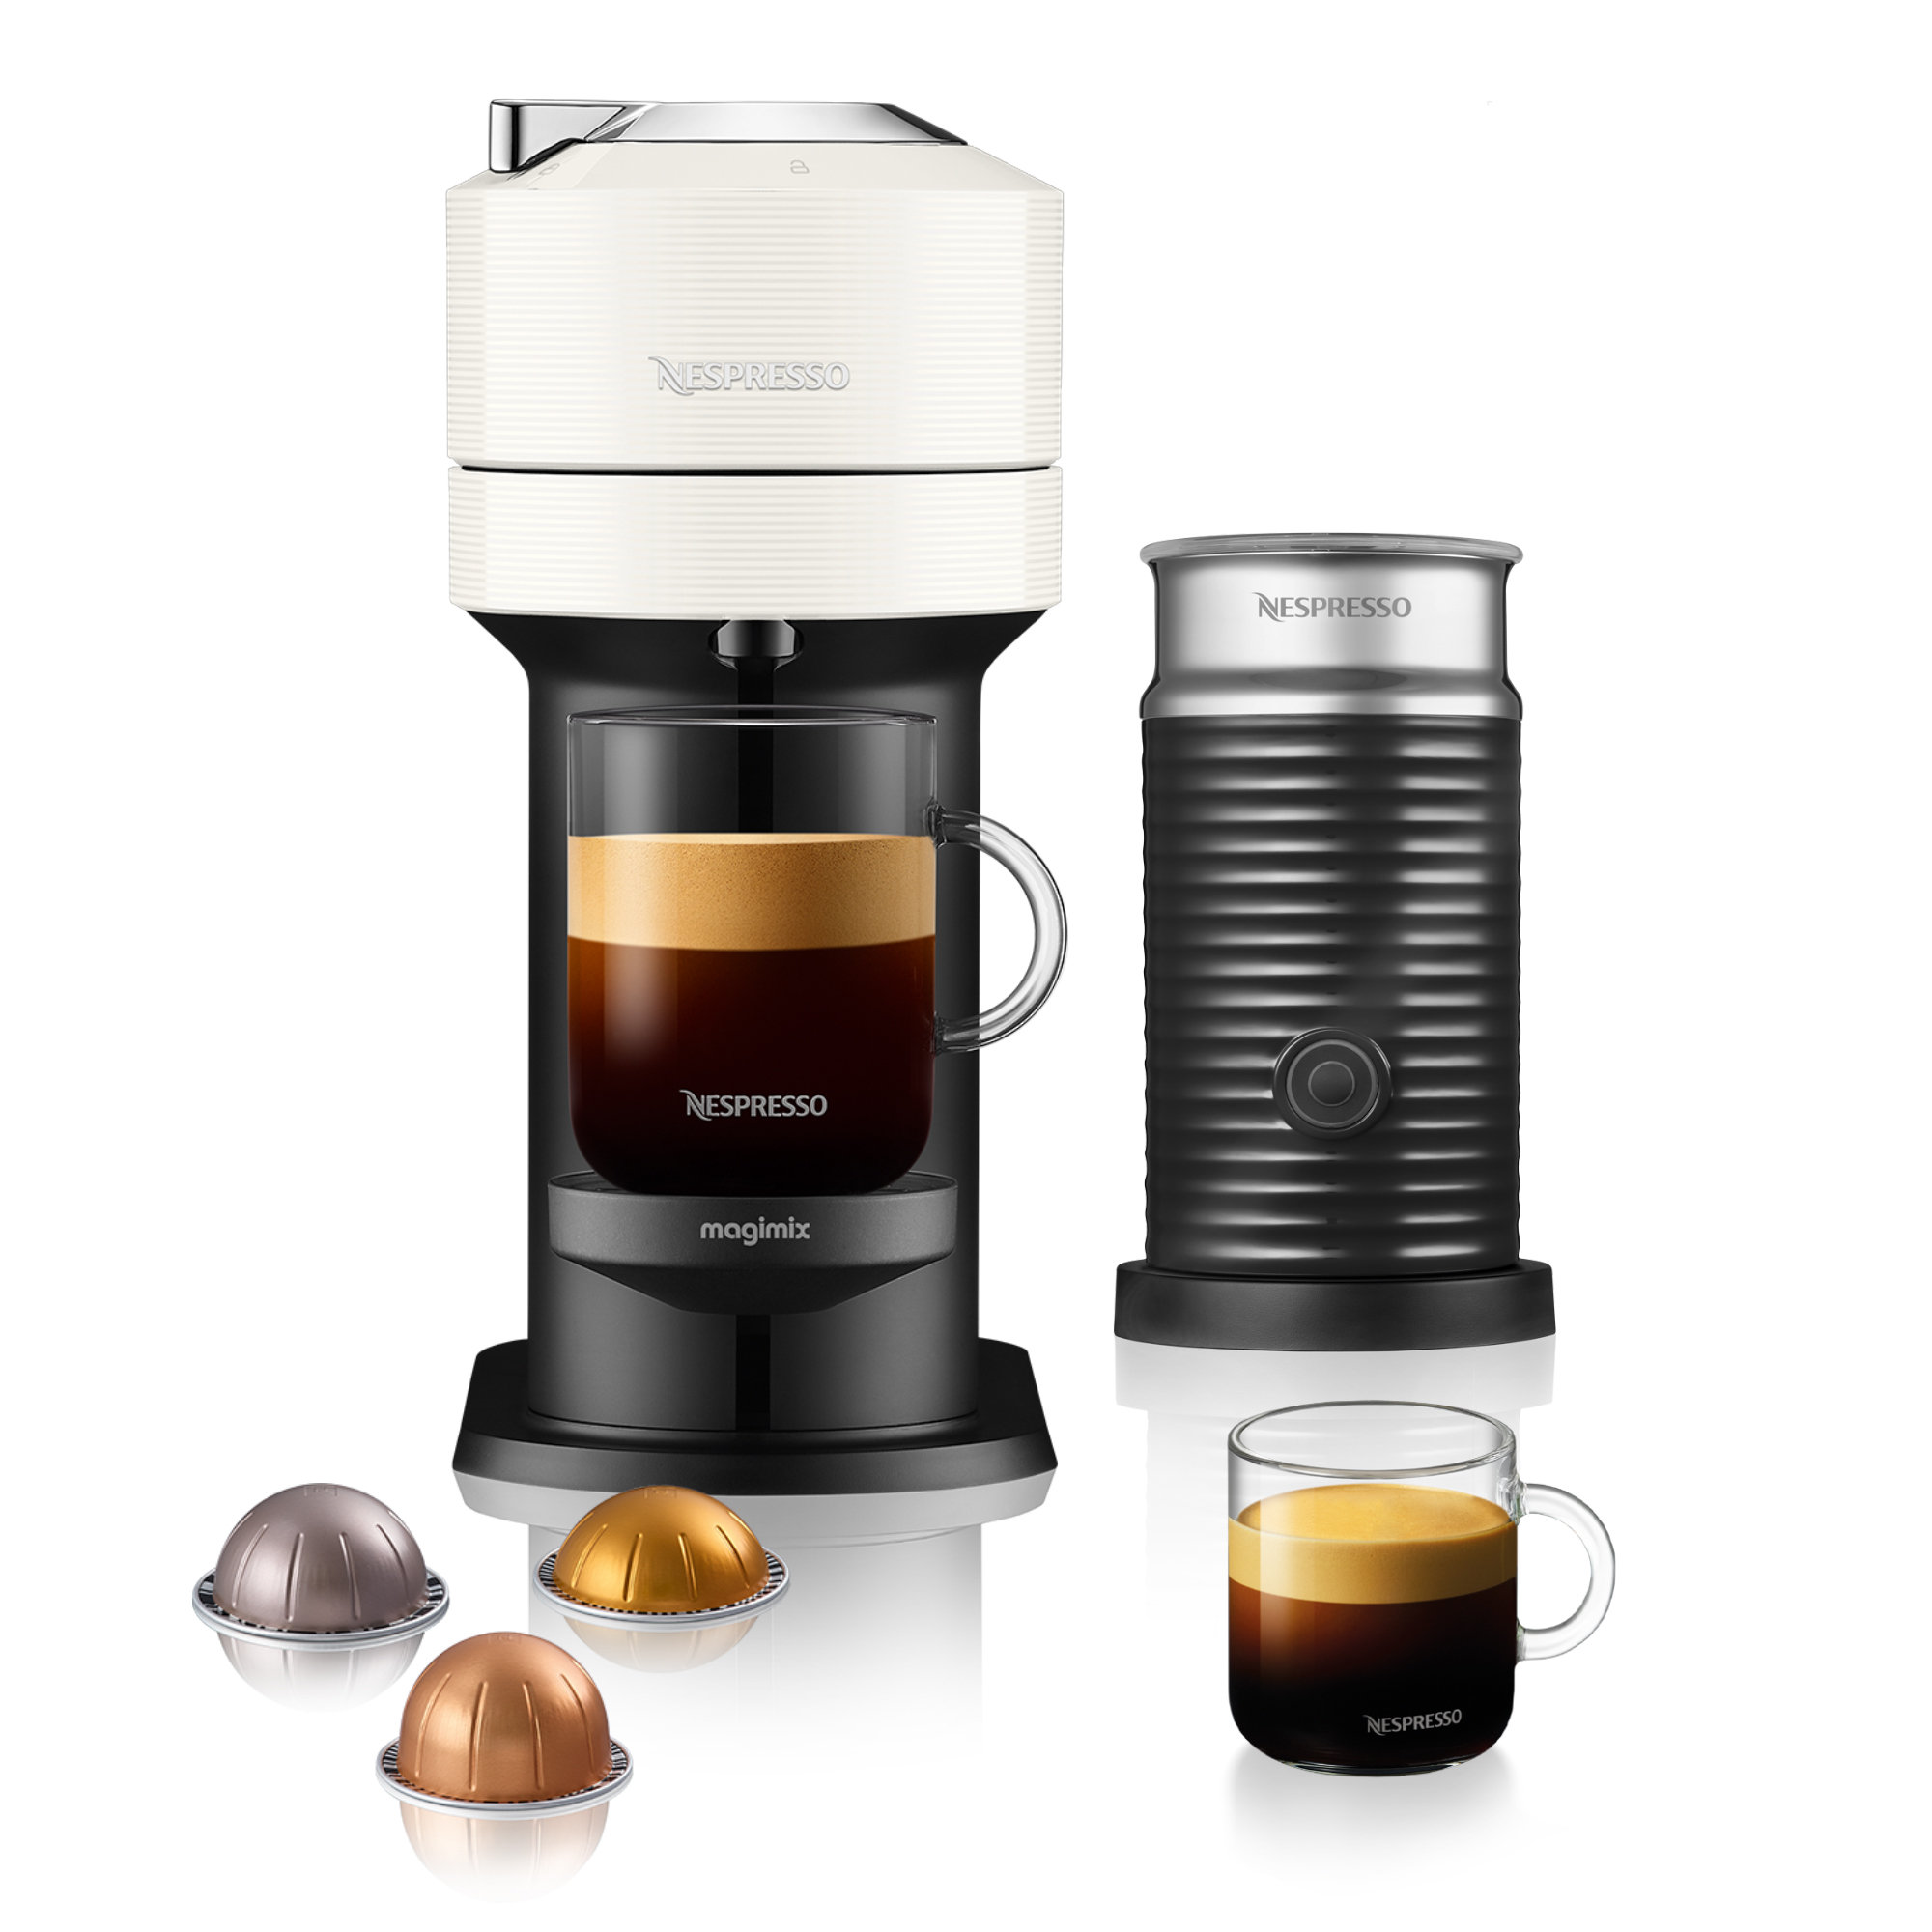 Nespresso Vertuo Next Deluxe Coffee Machine with Milk Frother by